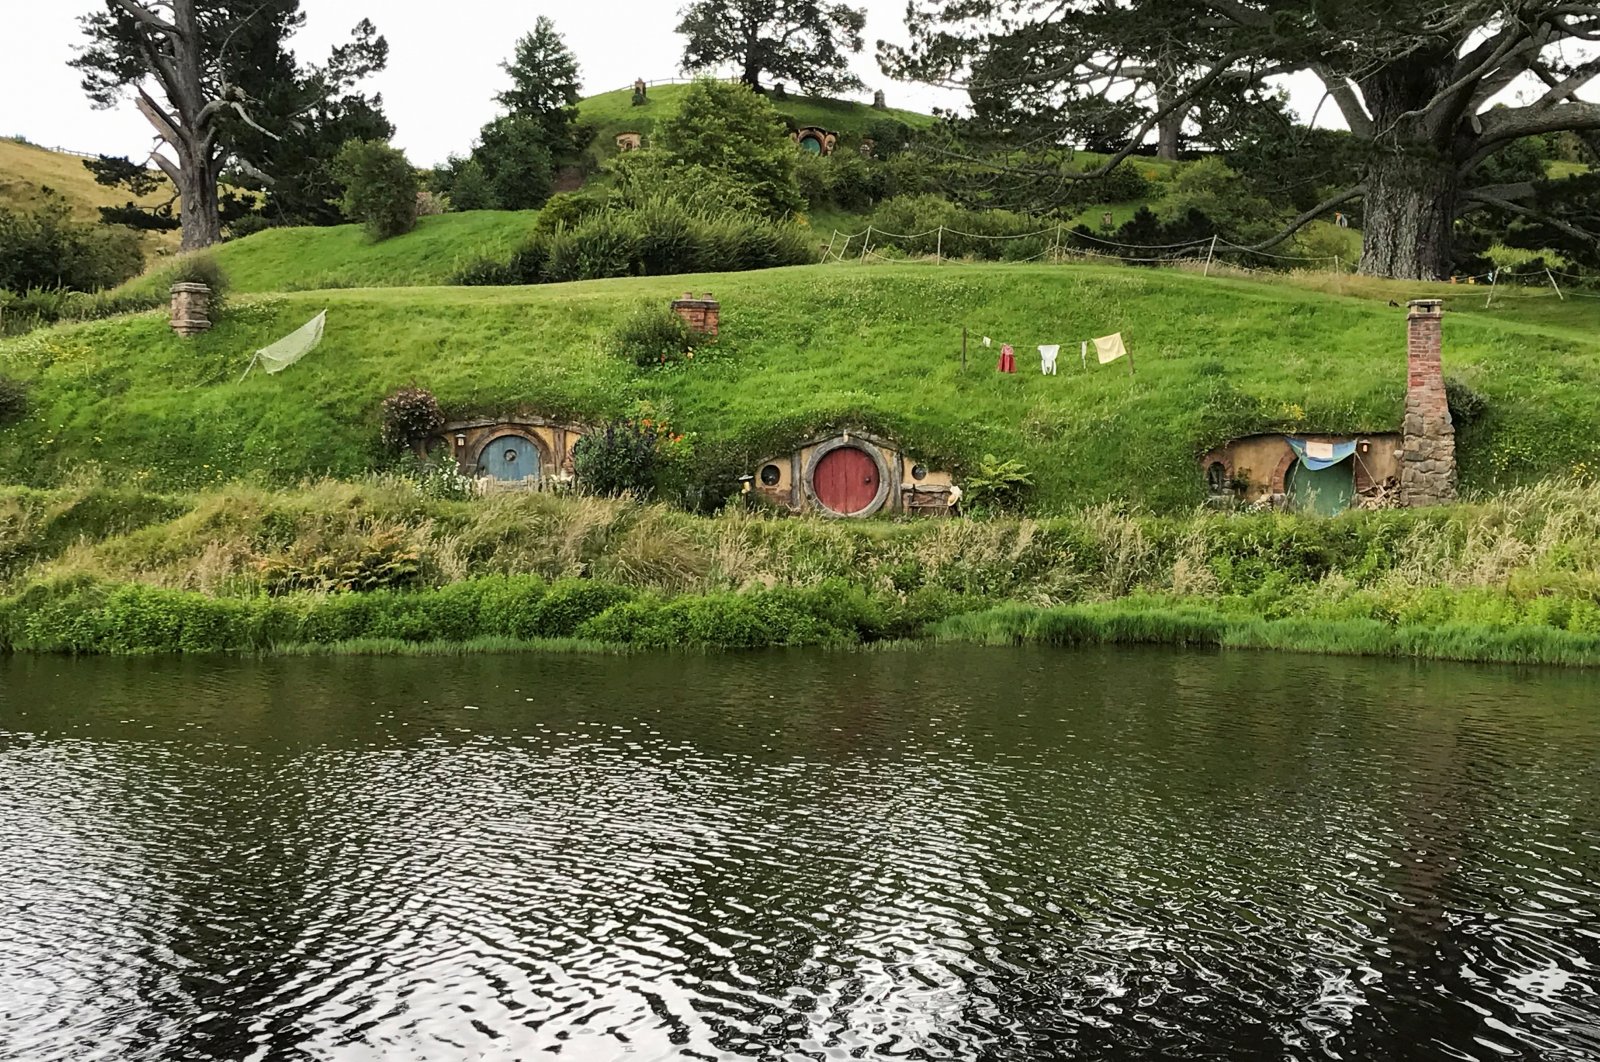 The Hobbiton Movie Set, a location for The Lord of the Rings and The Hobbit film trilogy, is pictured in Matamata, New Zealand, Dec. 27, 2020. (Reuters Photo) 